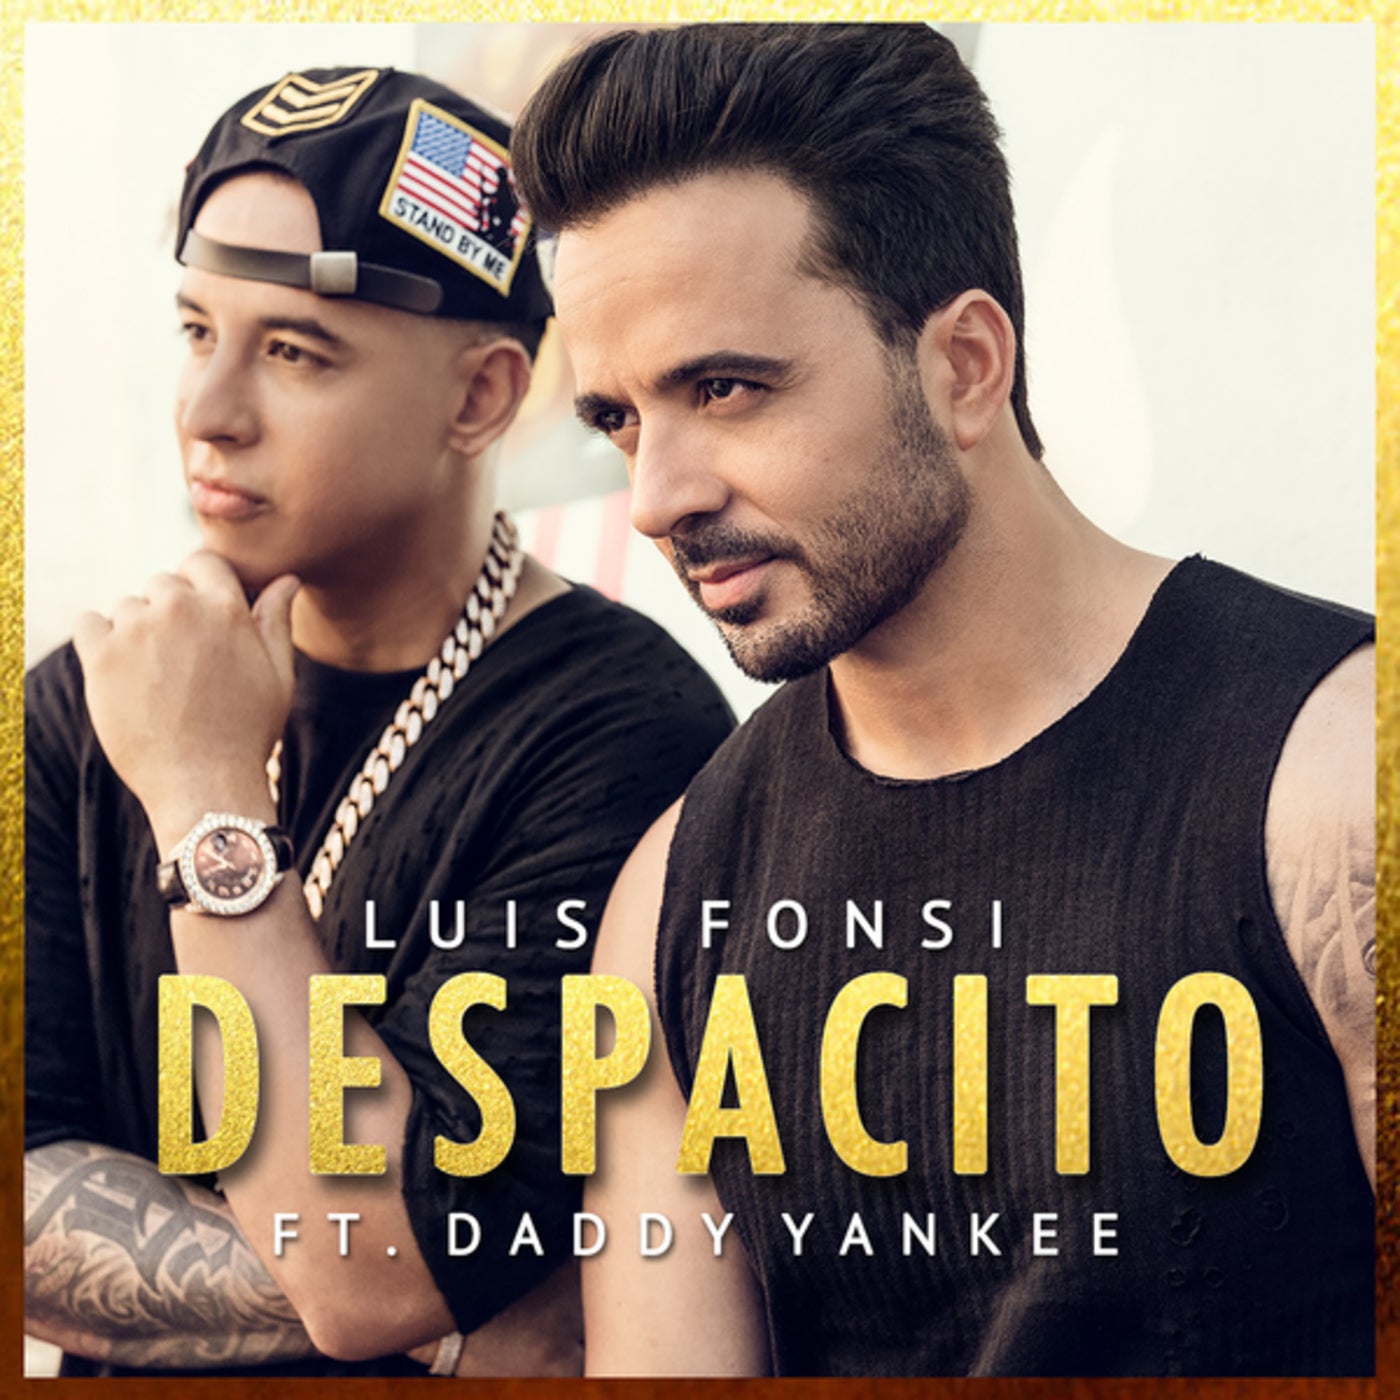 Rompe by Daddy Yankee on Beatsource